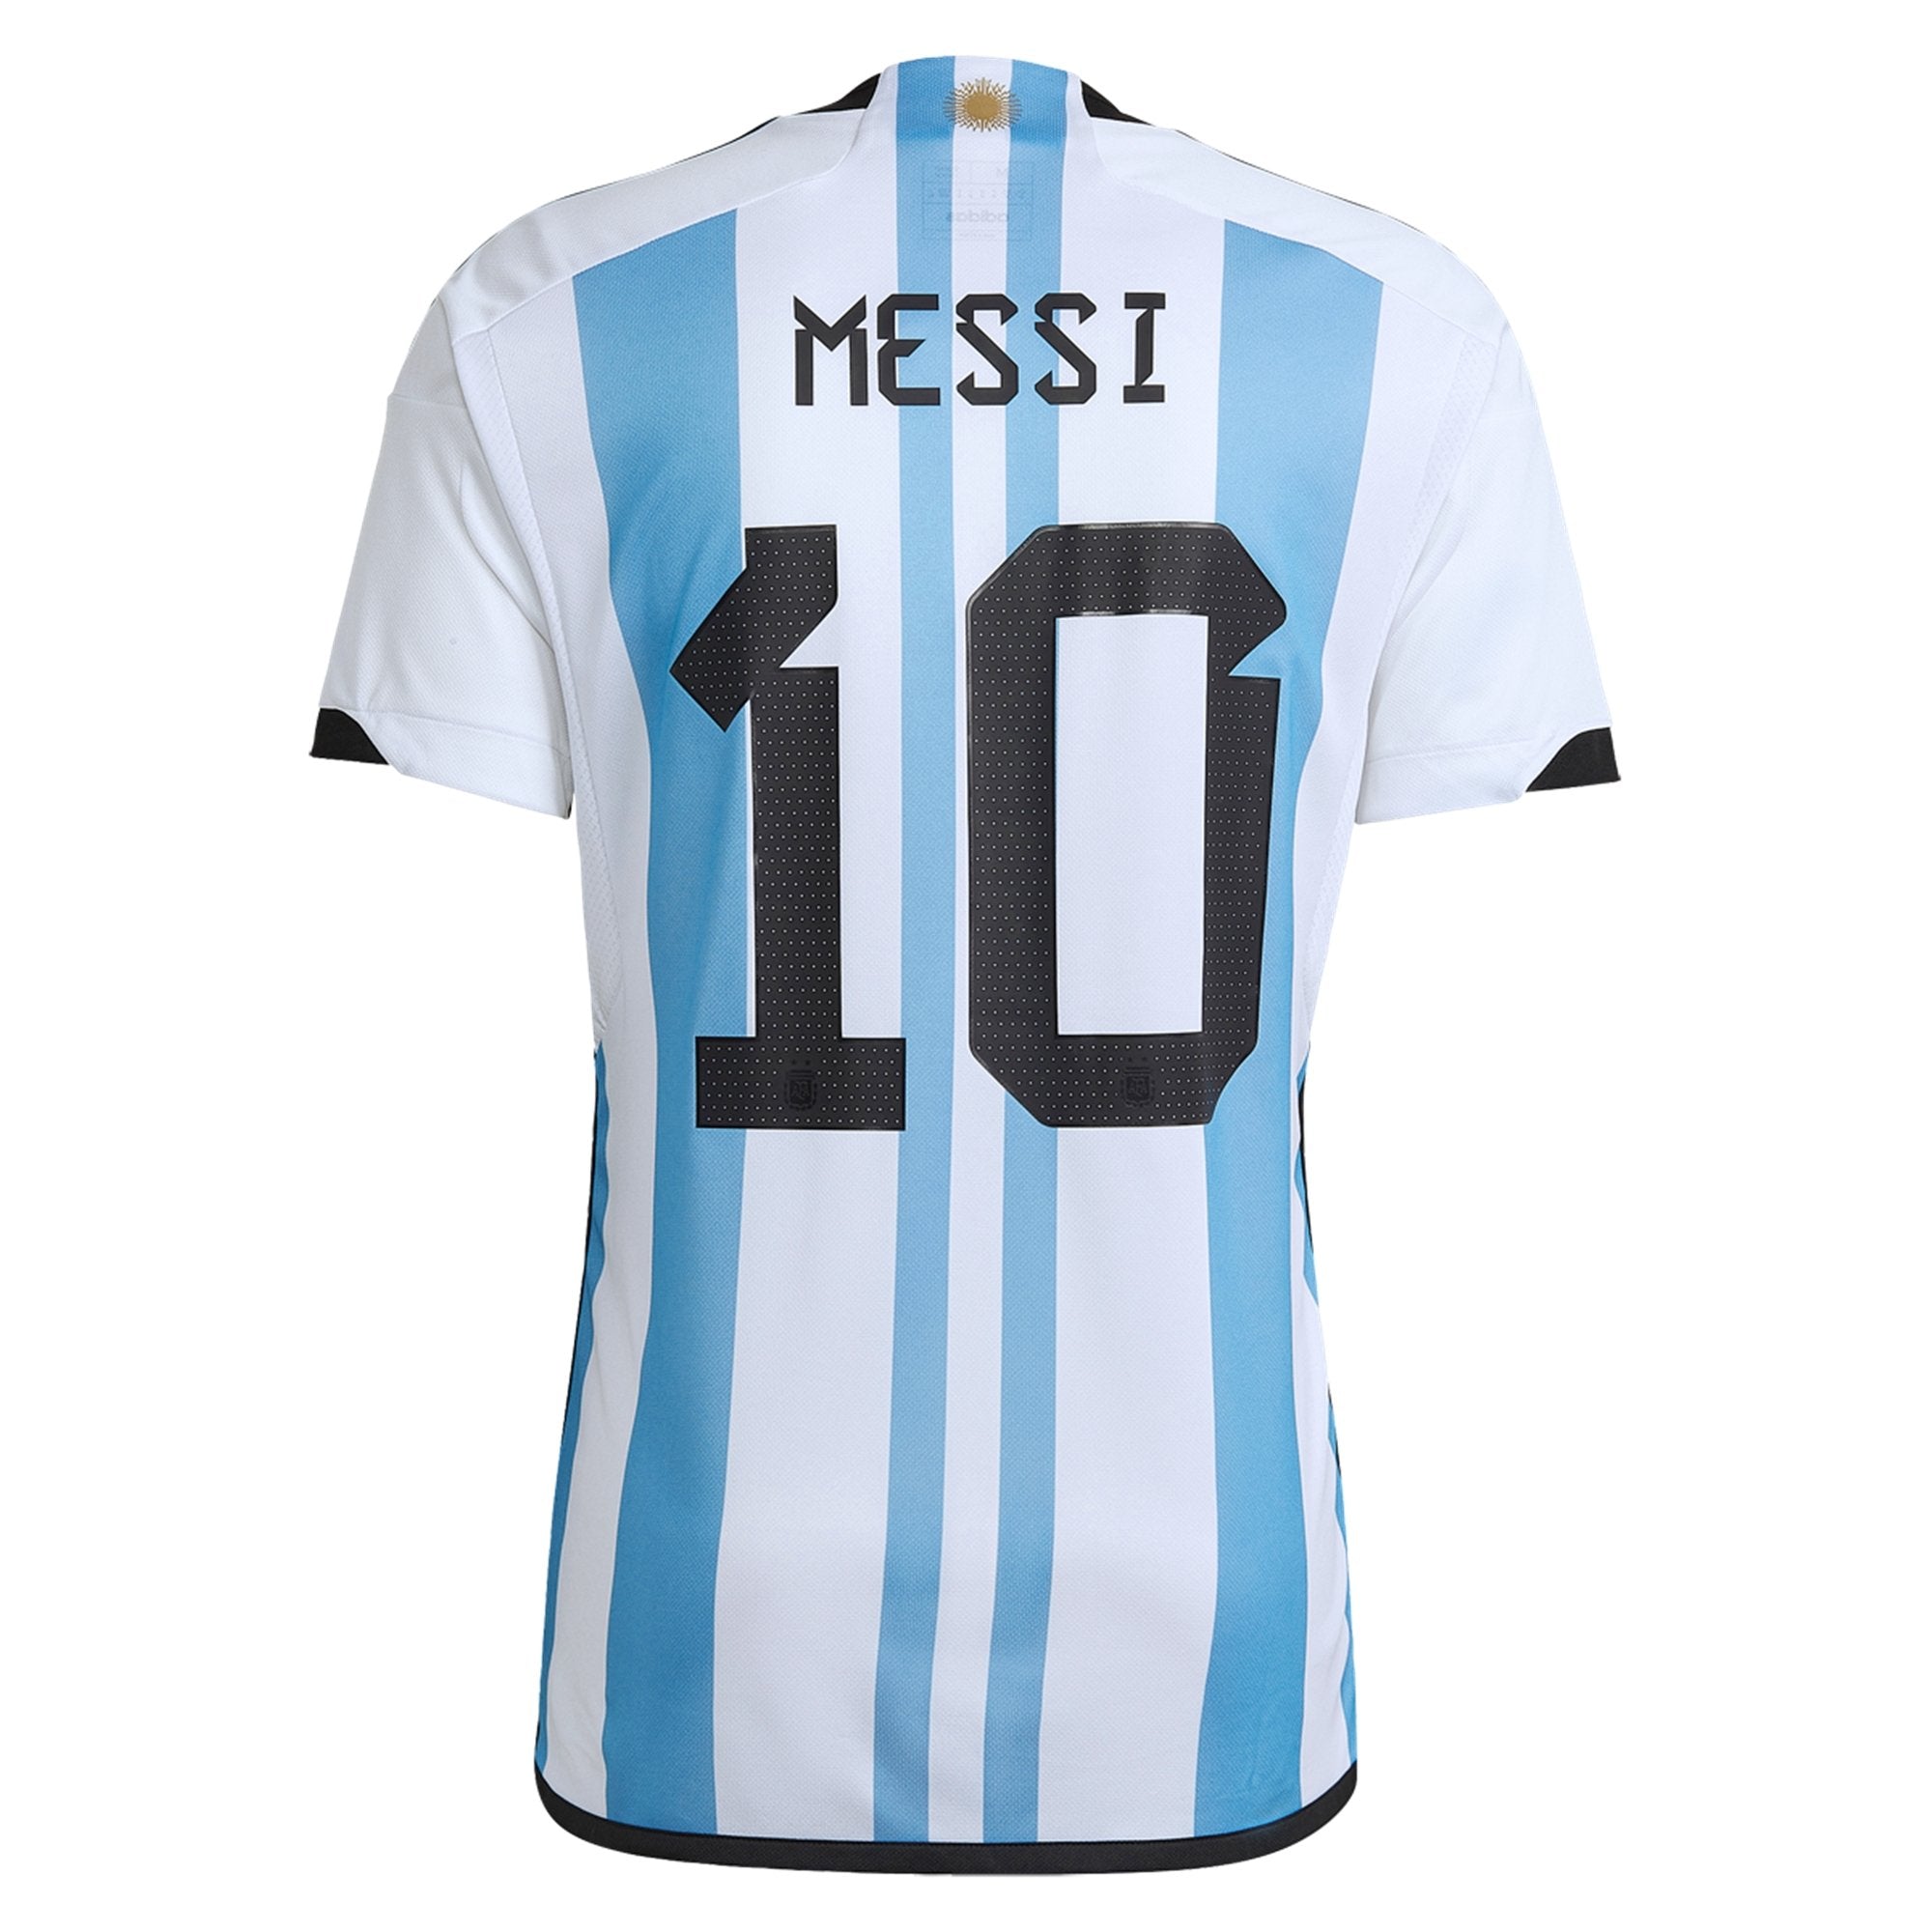 messi jersey 2022 world cup